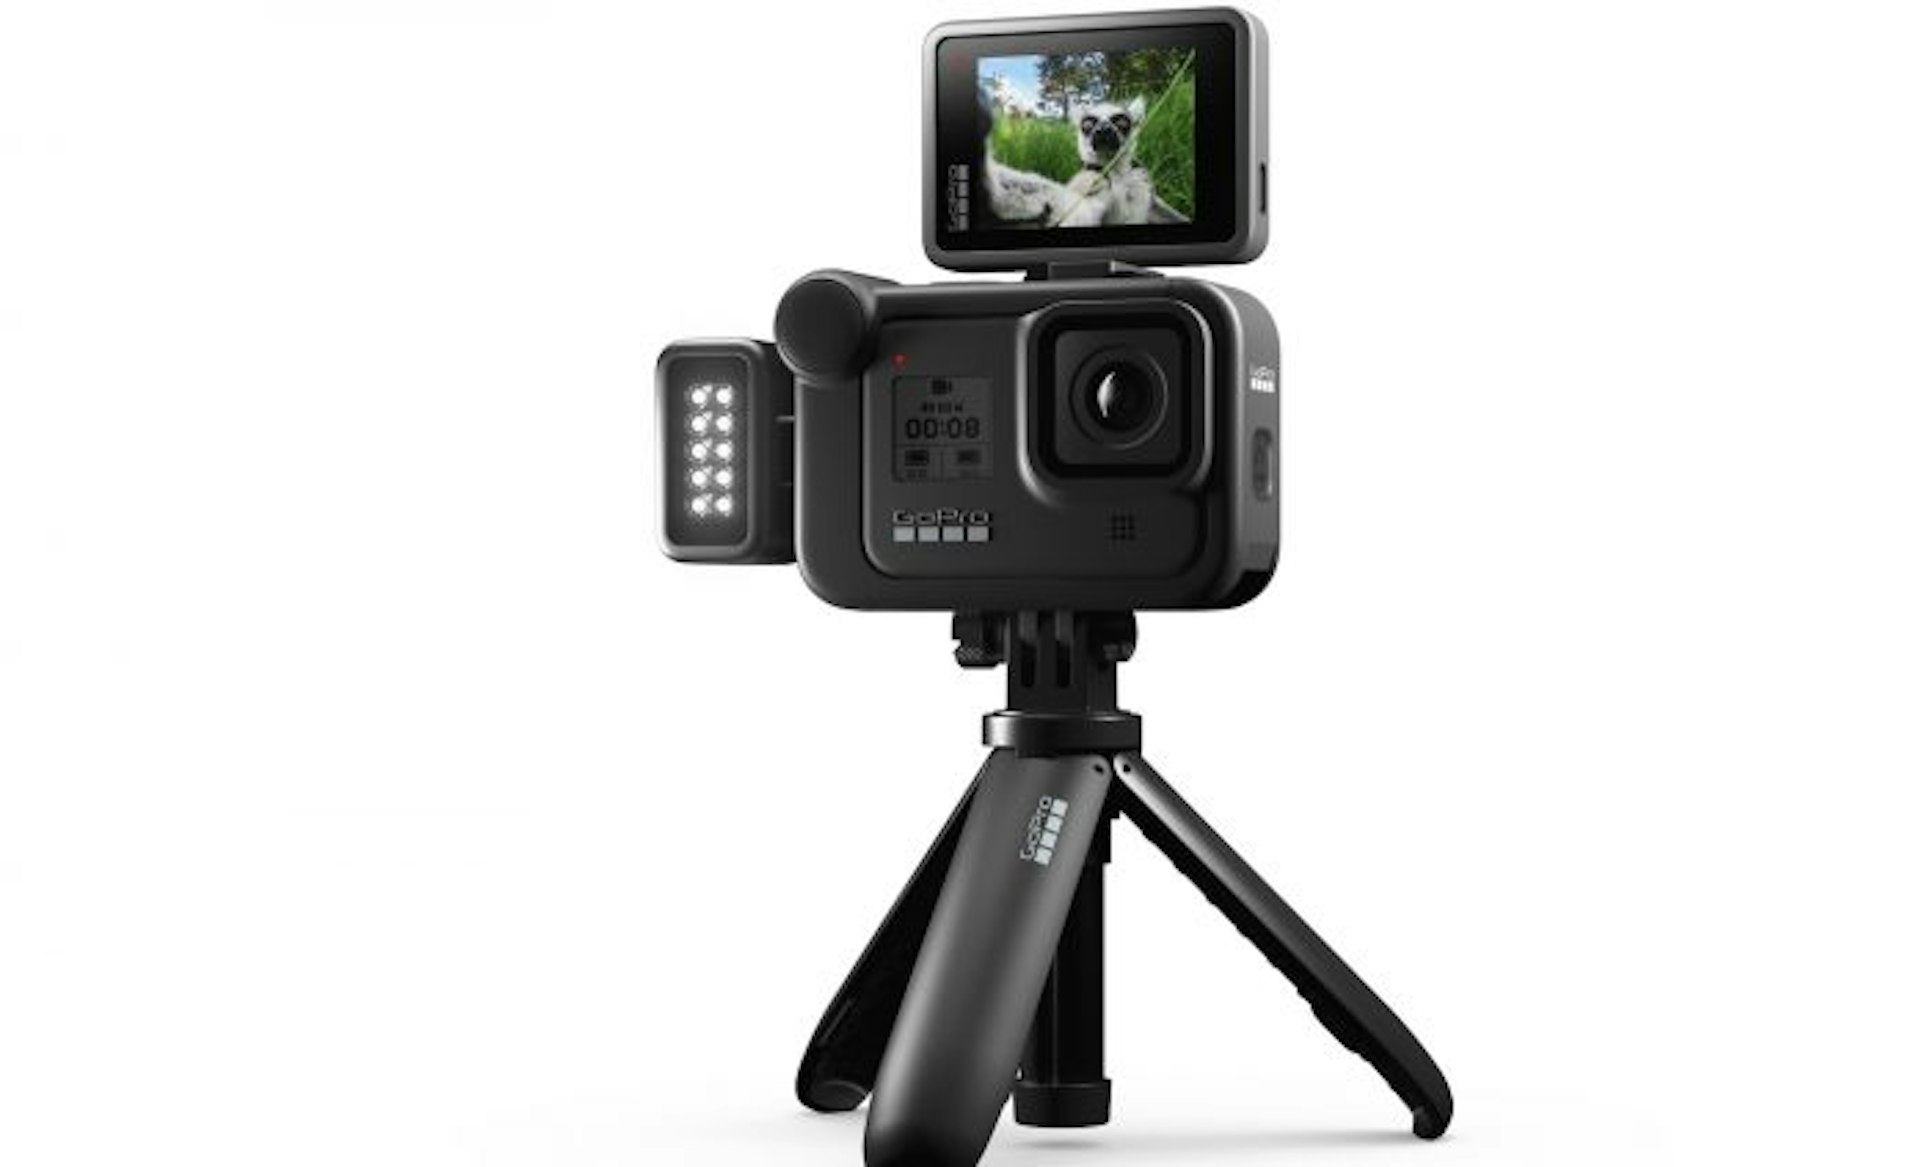 Product shot of the GoPro Hero 8